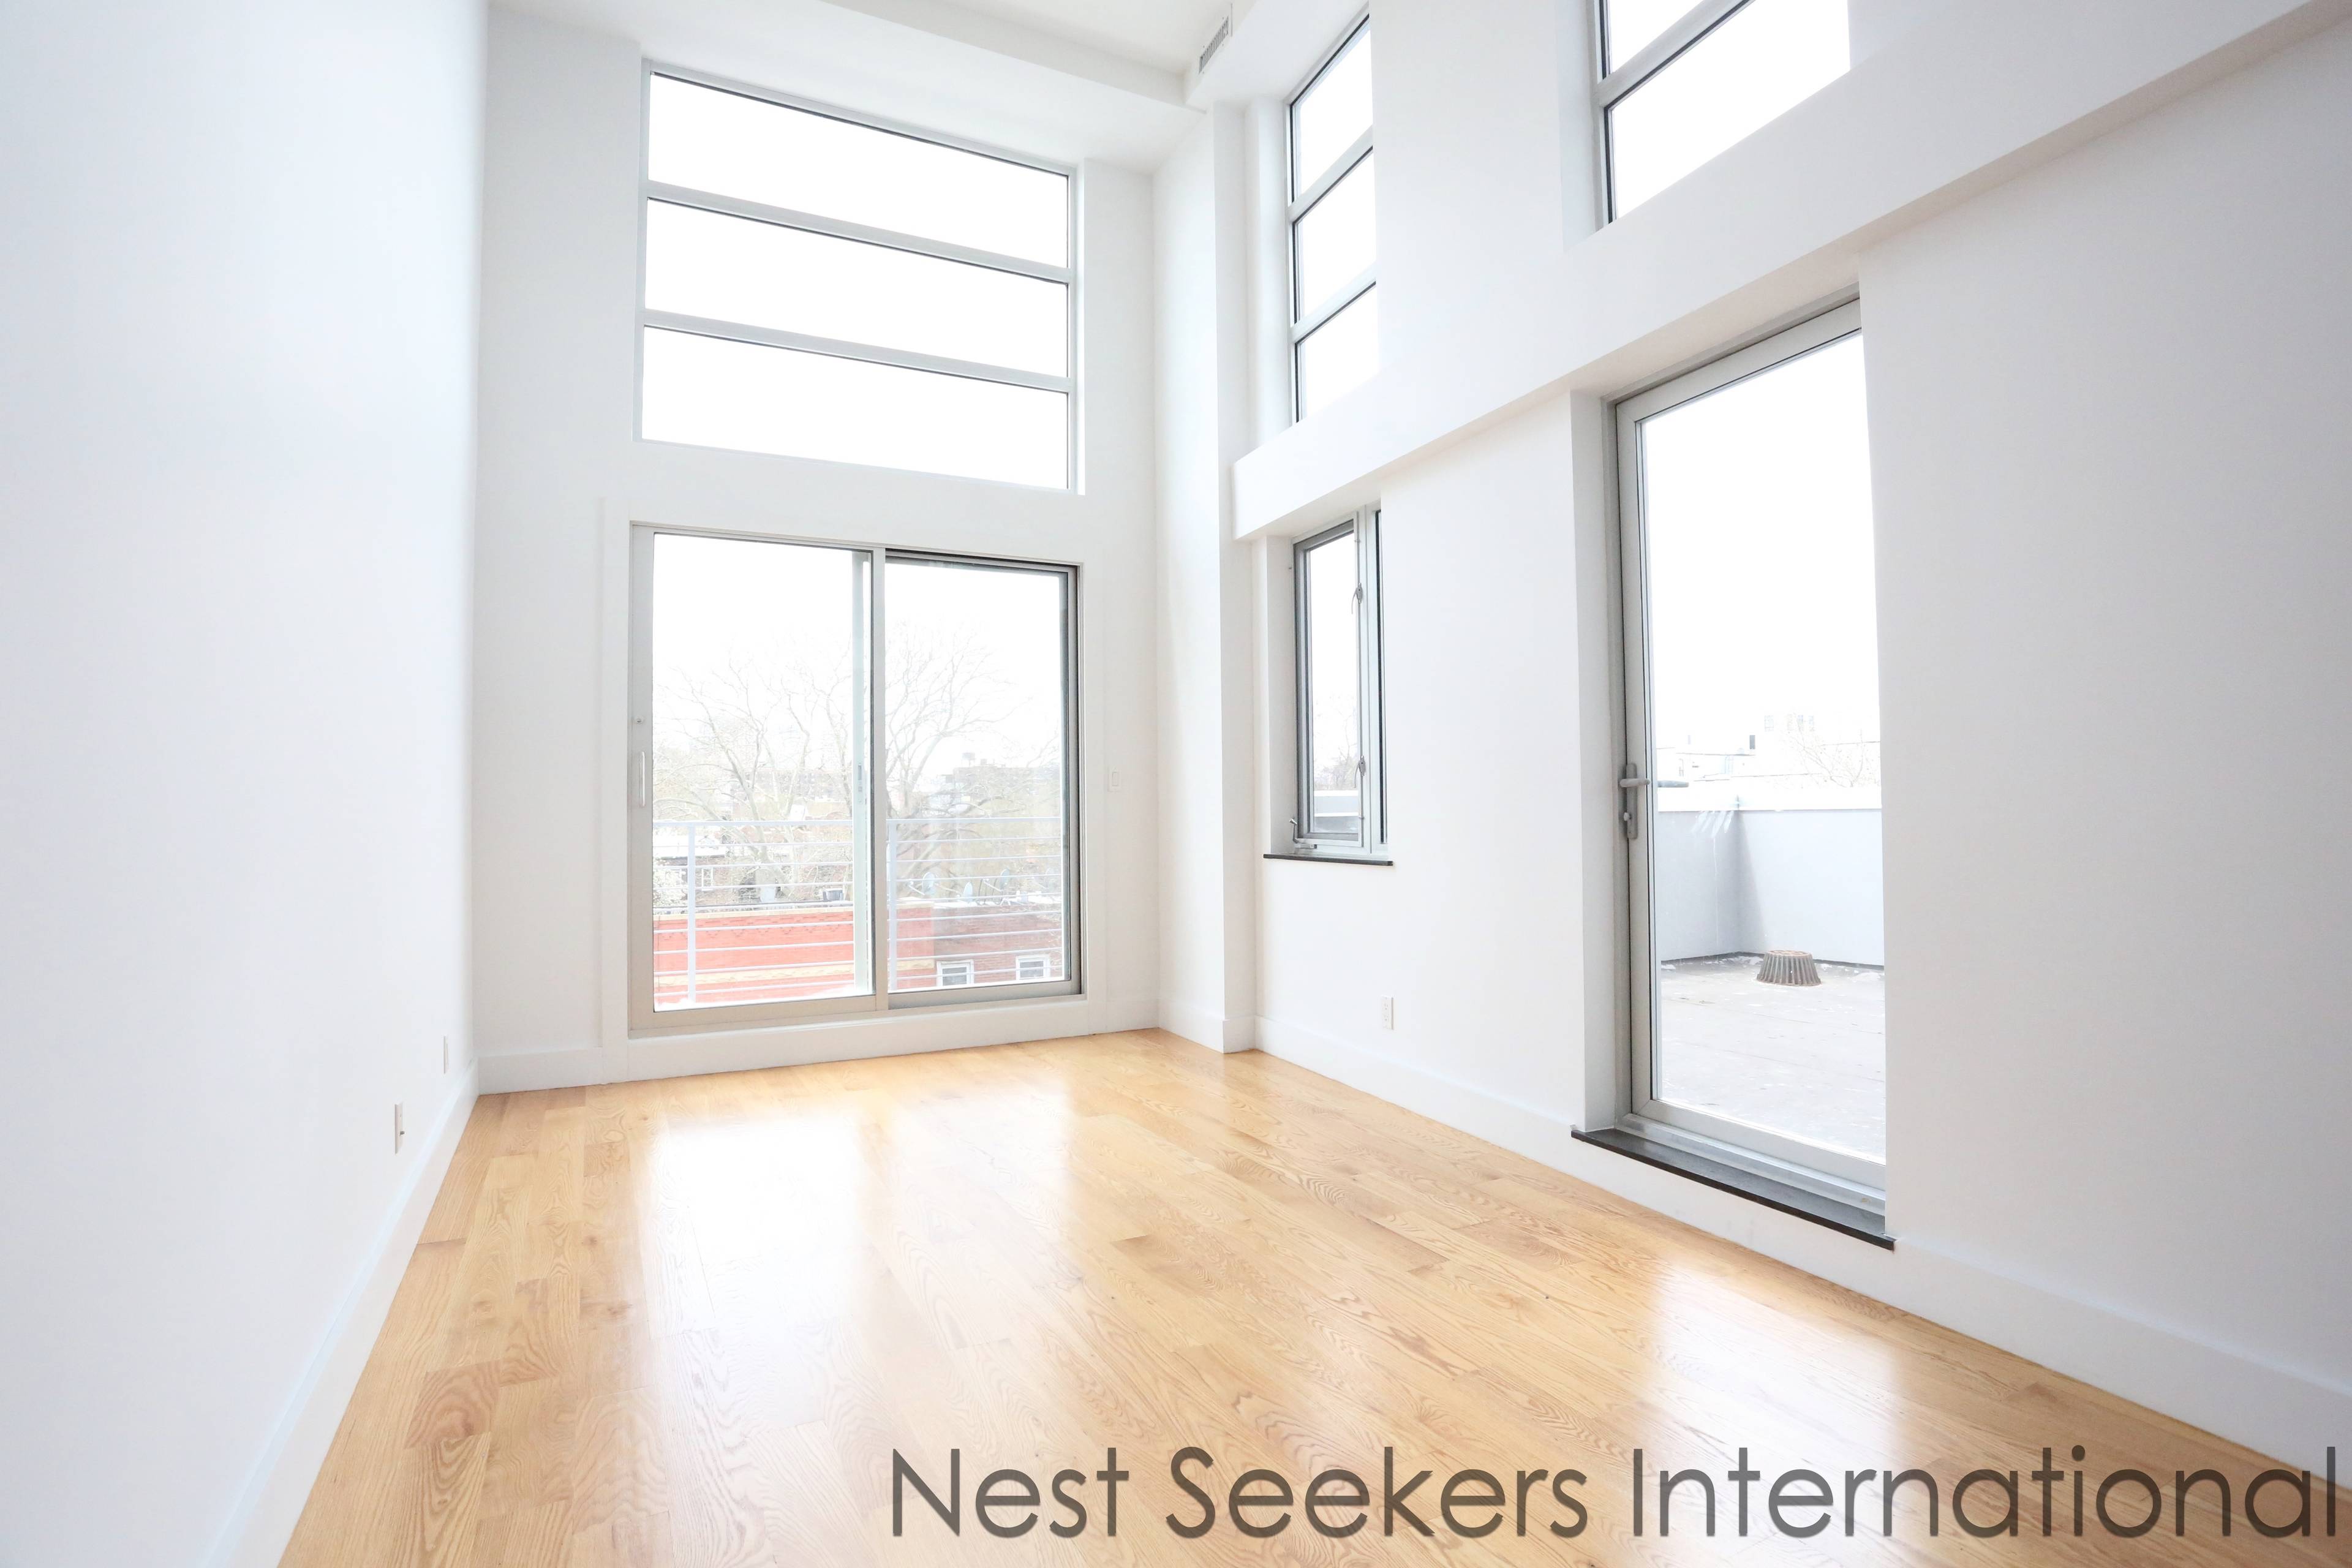 INCREDIBLE 2 BED Convertable apartment with 15 Ft. Ceilings and ROOF DECK in a BRAND NEW DEVELOPMENT in CLINTN HILL, BK!